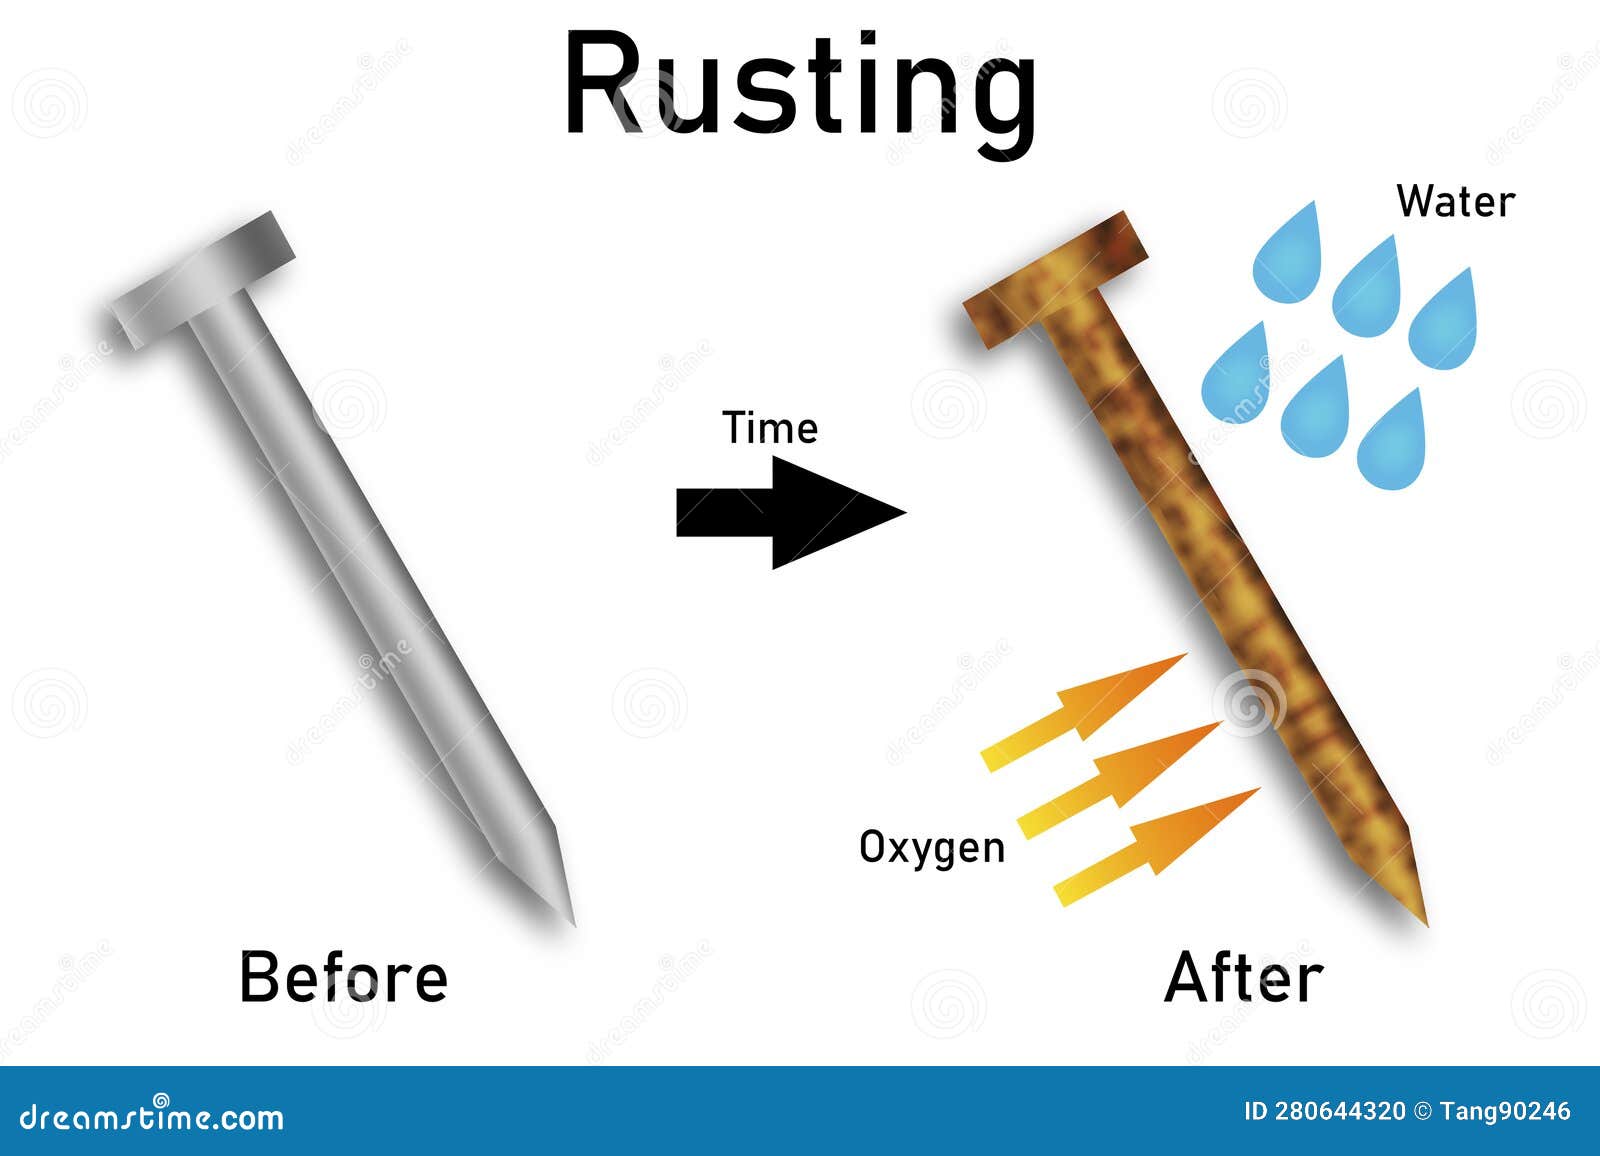 What causes rusting of iron? Design an activity to show the conditions  needed for iron nails to rust.